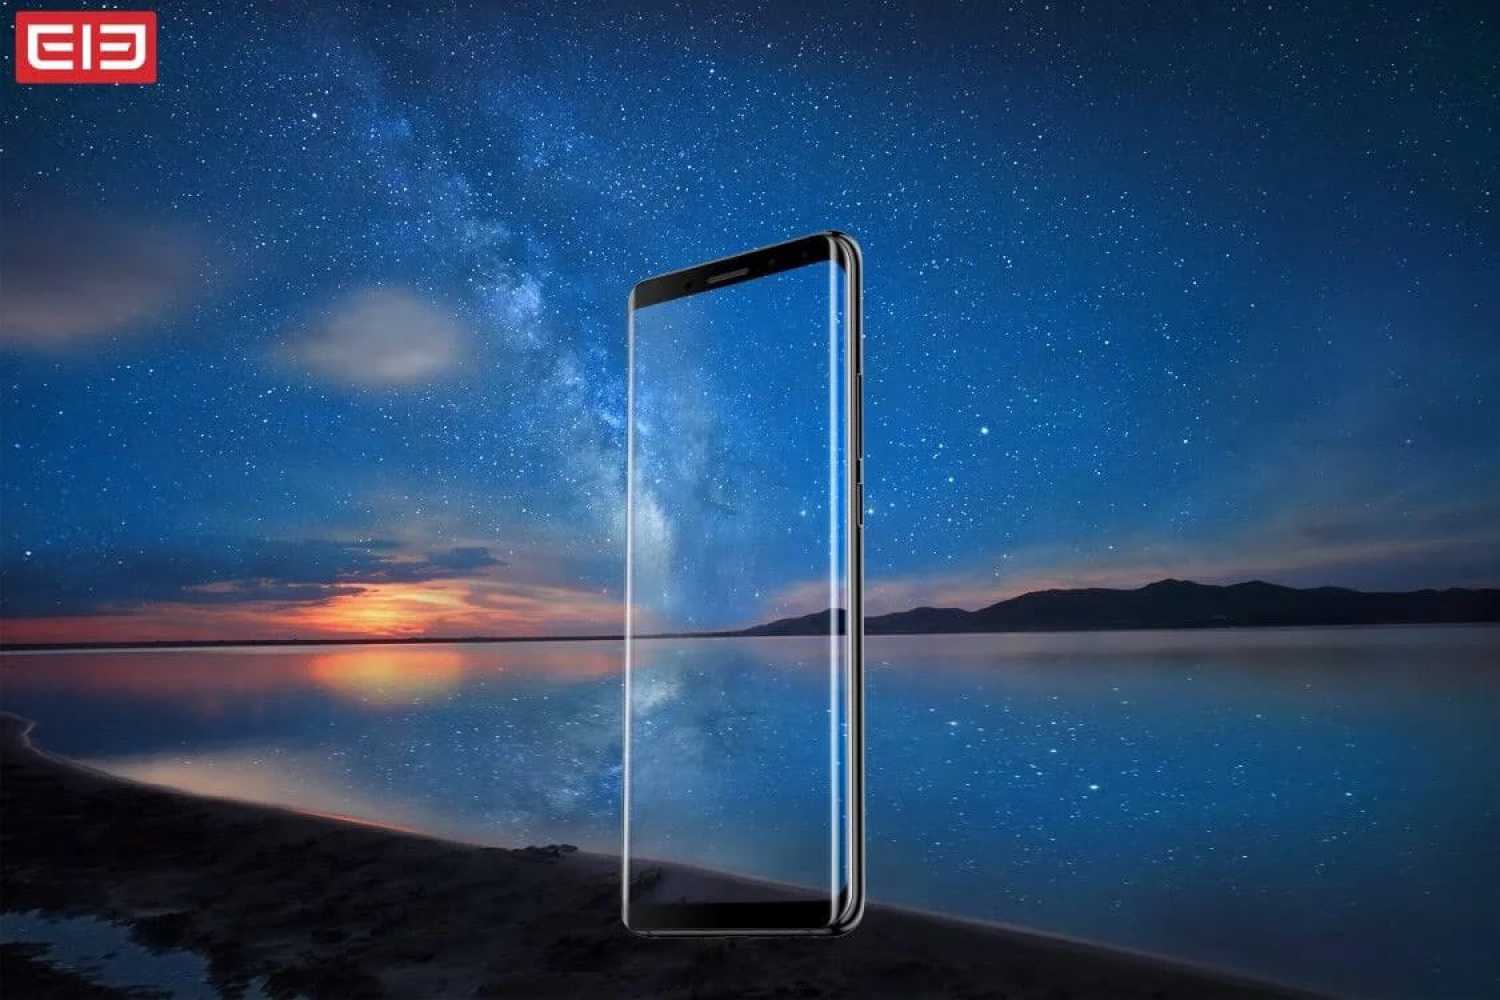 Edge-to-edge AMOLED smartphone encroach on the laurels of the Galaxy S8